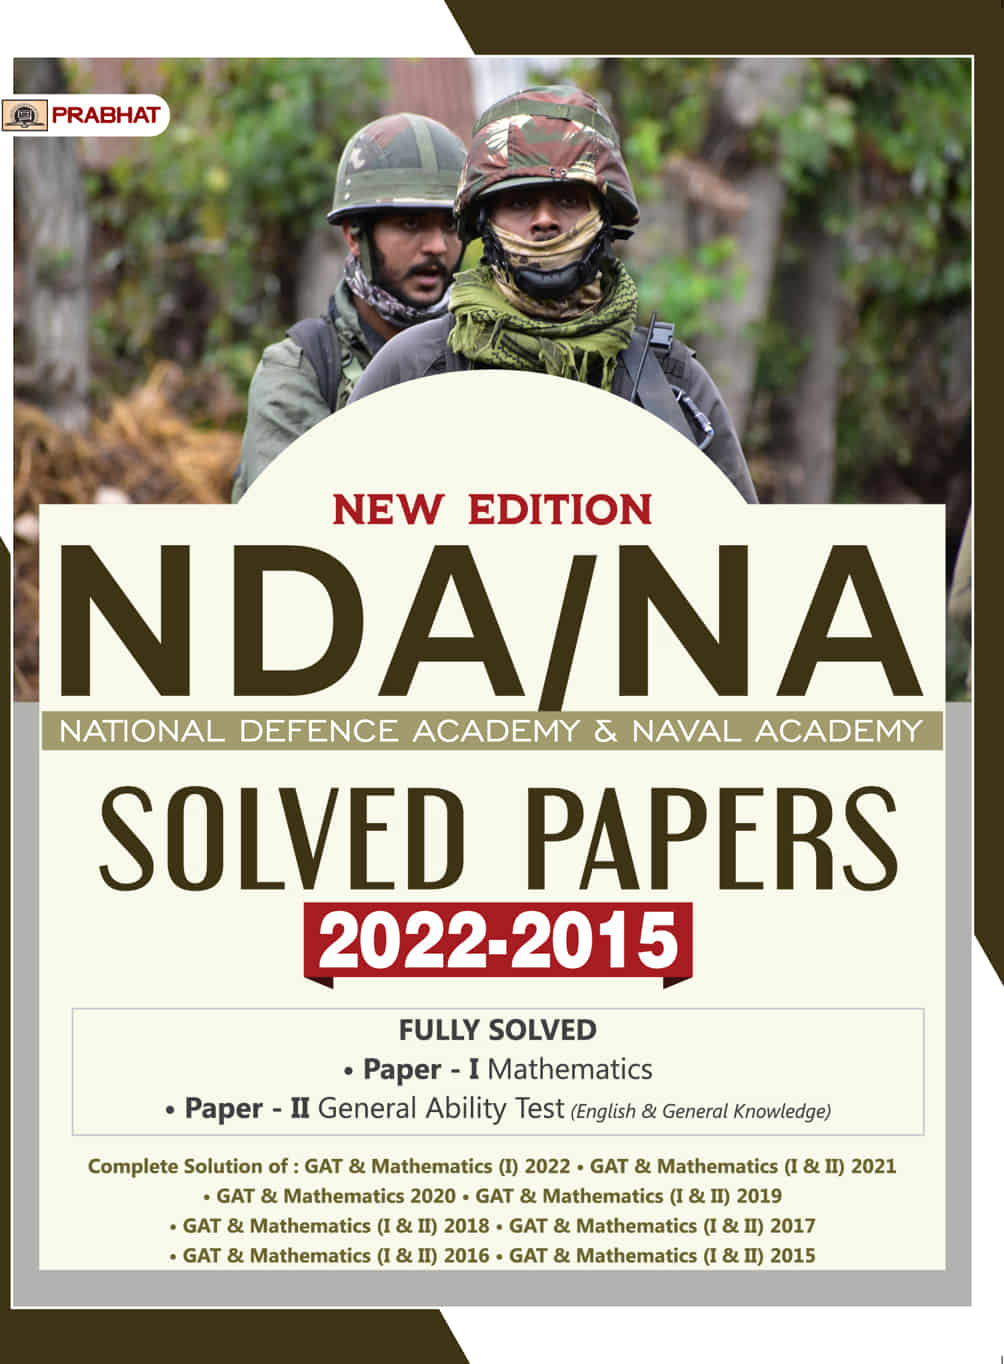 NDA/NA National Defence Academy & Naval Academy Solved Papers (2021-2015 English) 